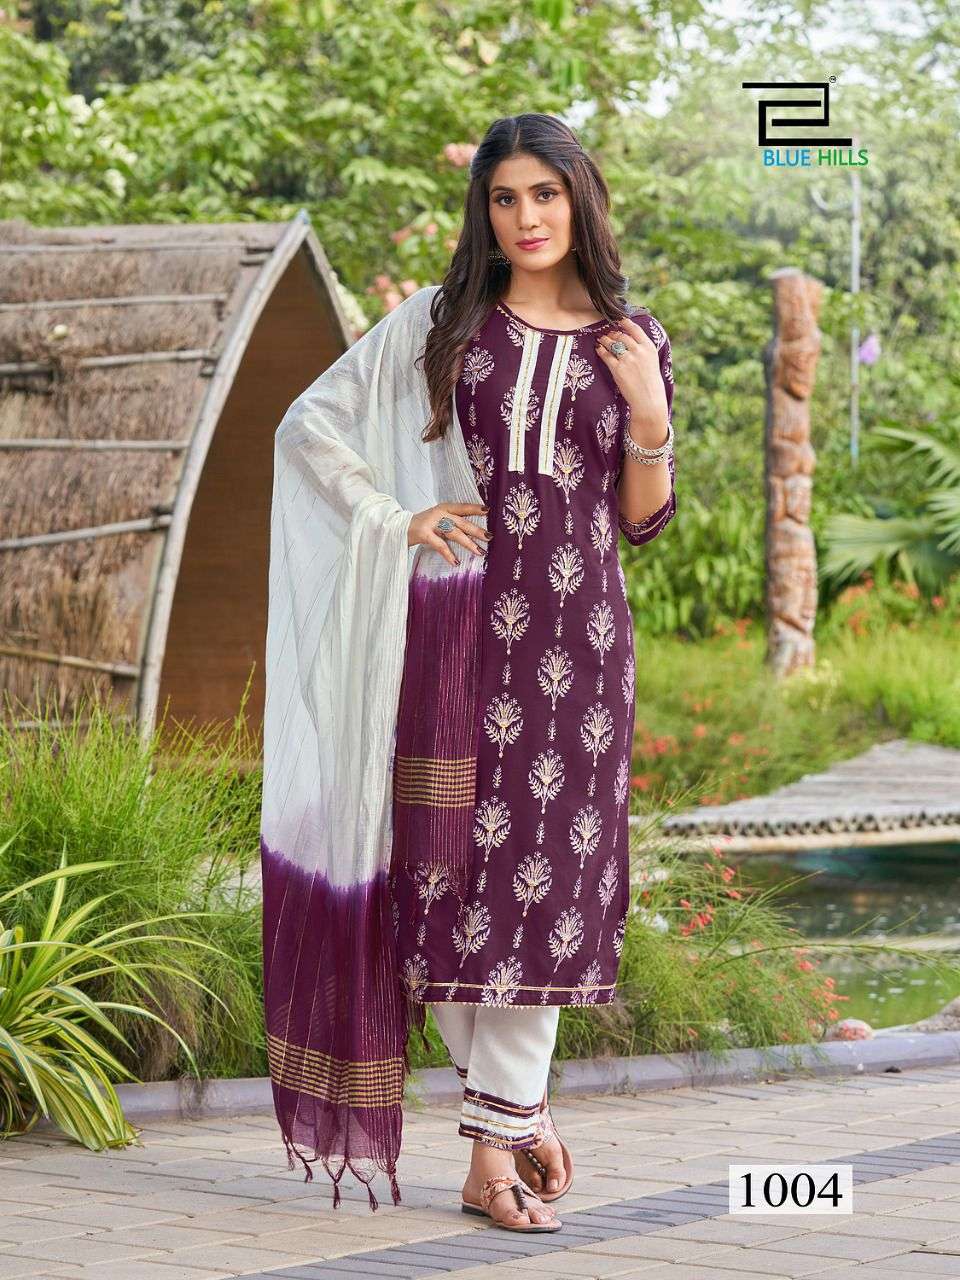 BLUE HILLS PRESENTS LOCKUP 1 HEAVY RAYON FOIL PRINT WHOLESALE READYMADE COLLECTION